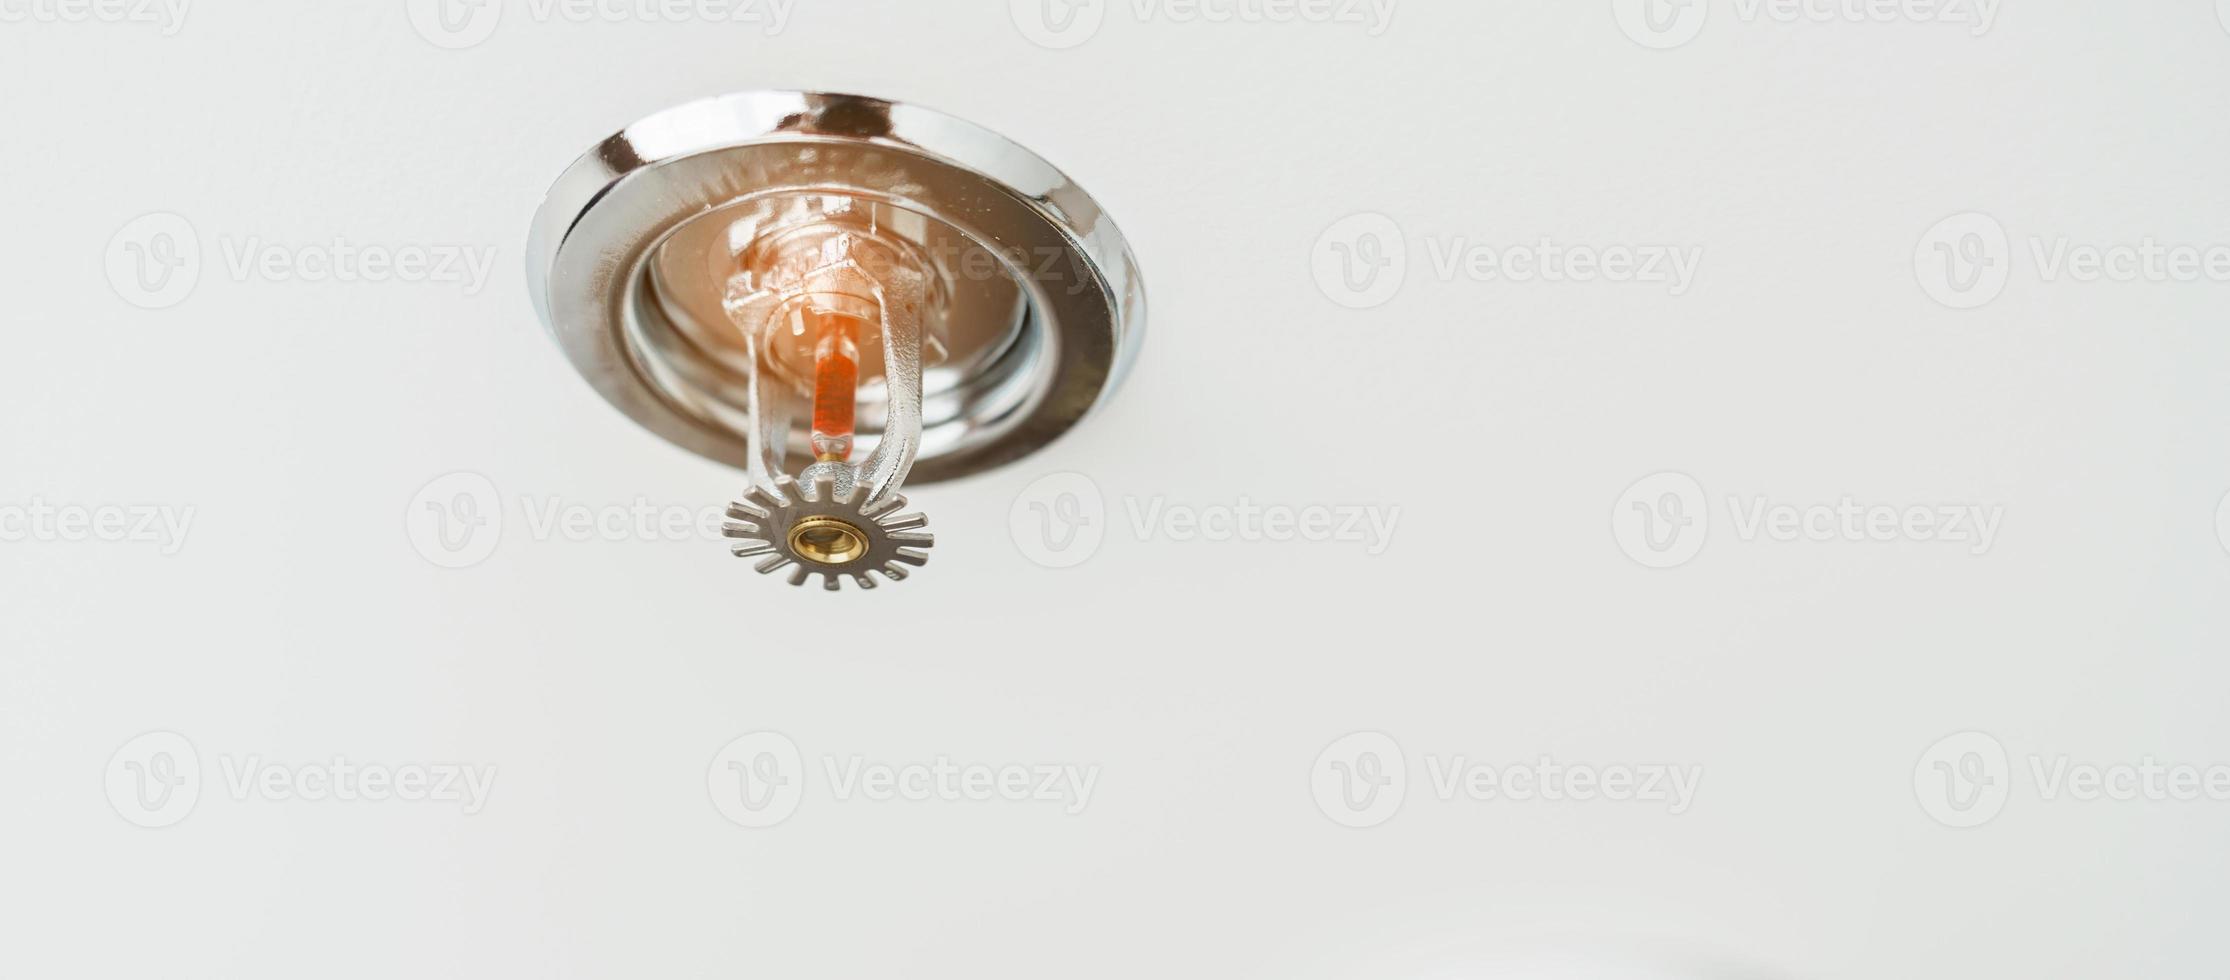 Fire Sprinkler detector mounted on roof in home or apartment. Safety and conflagration security concept photo